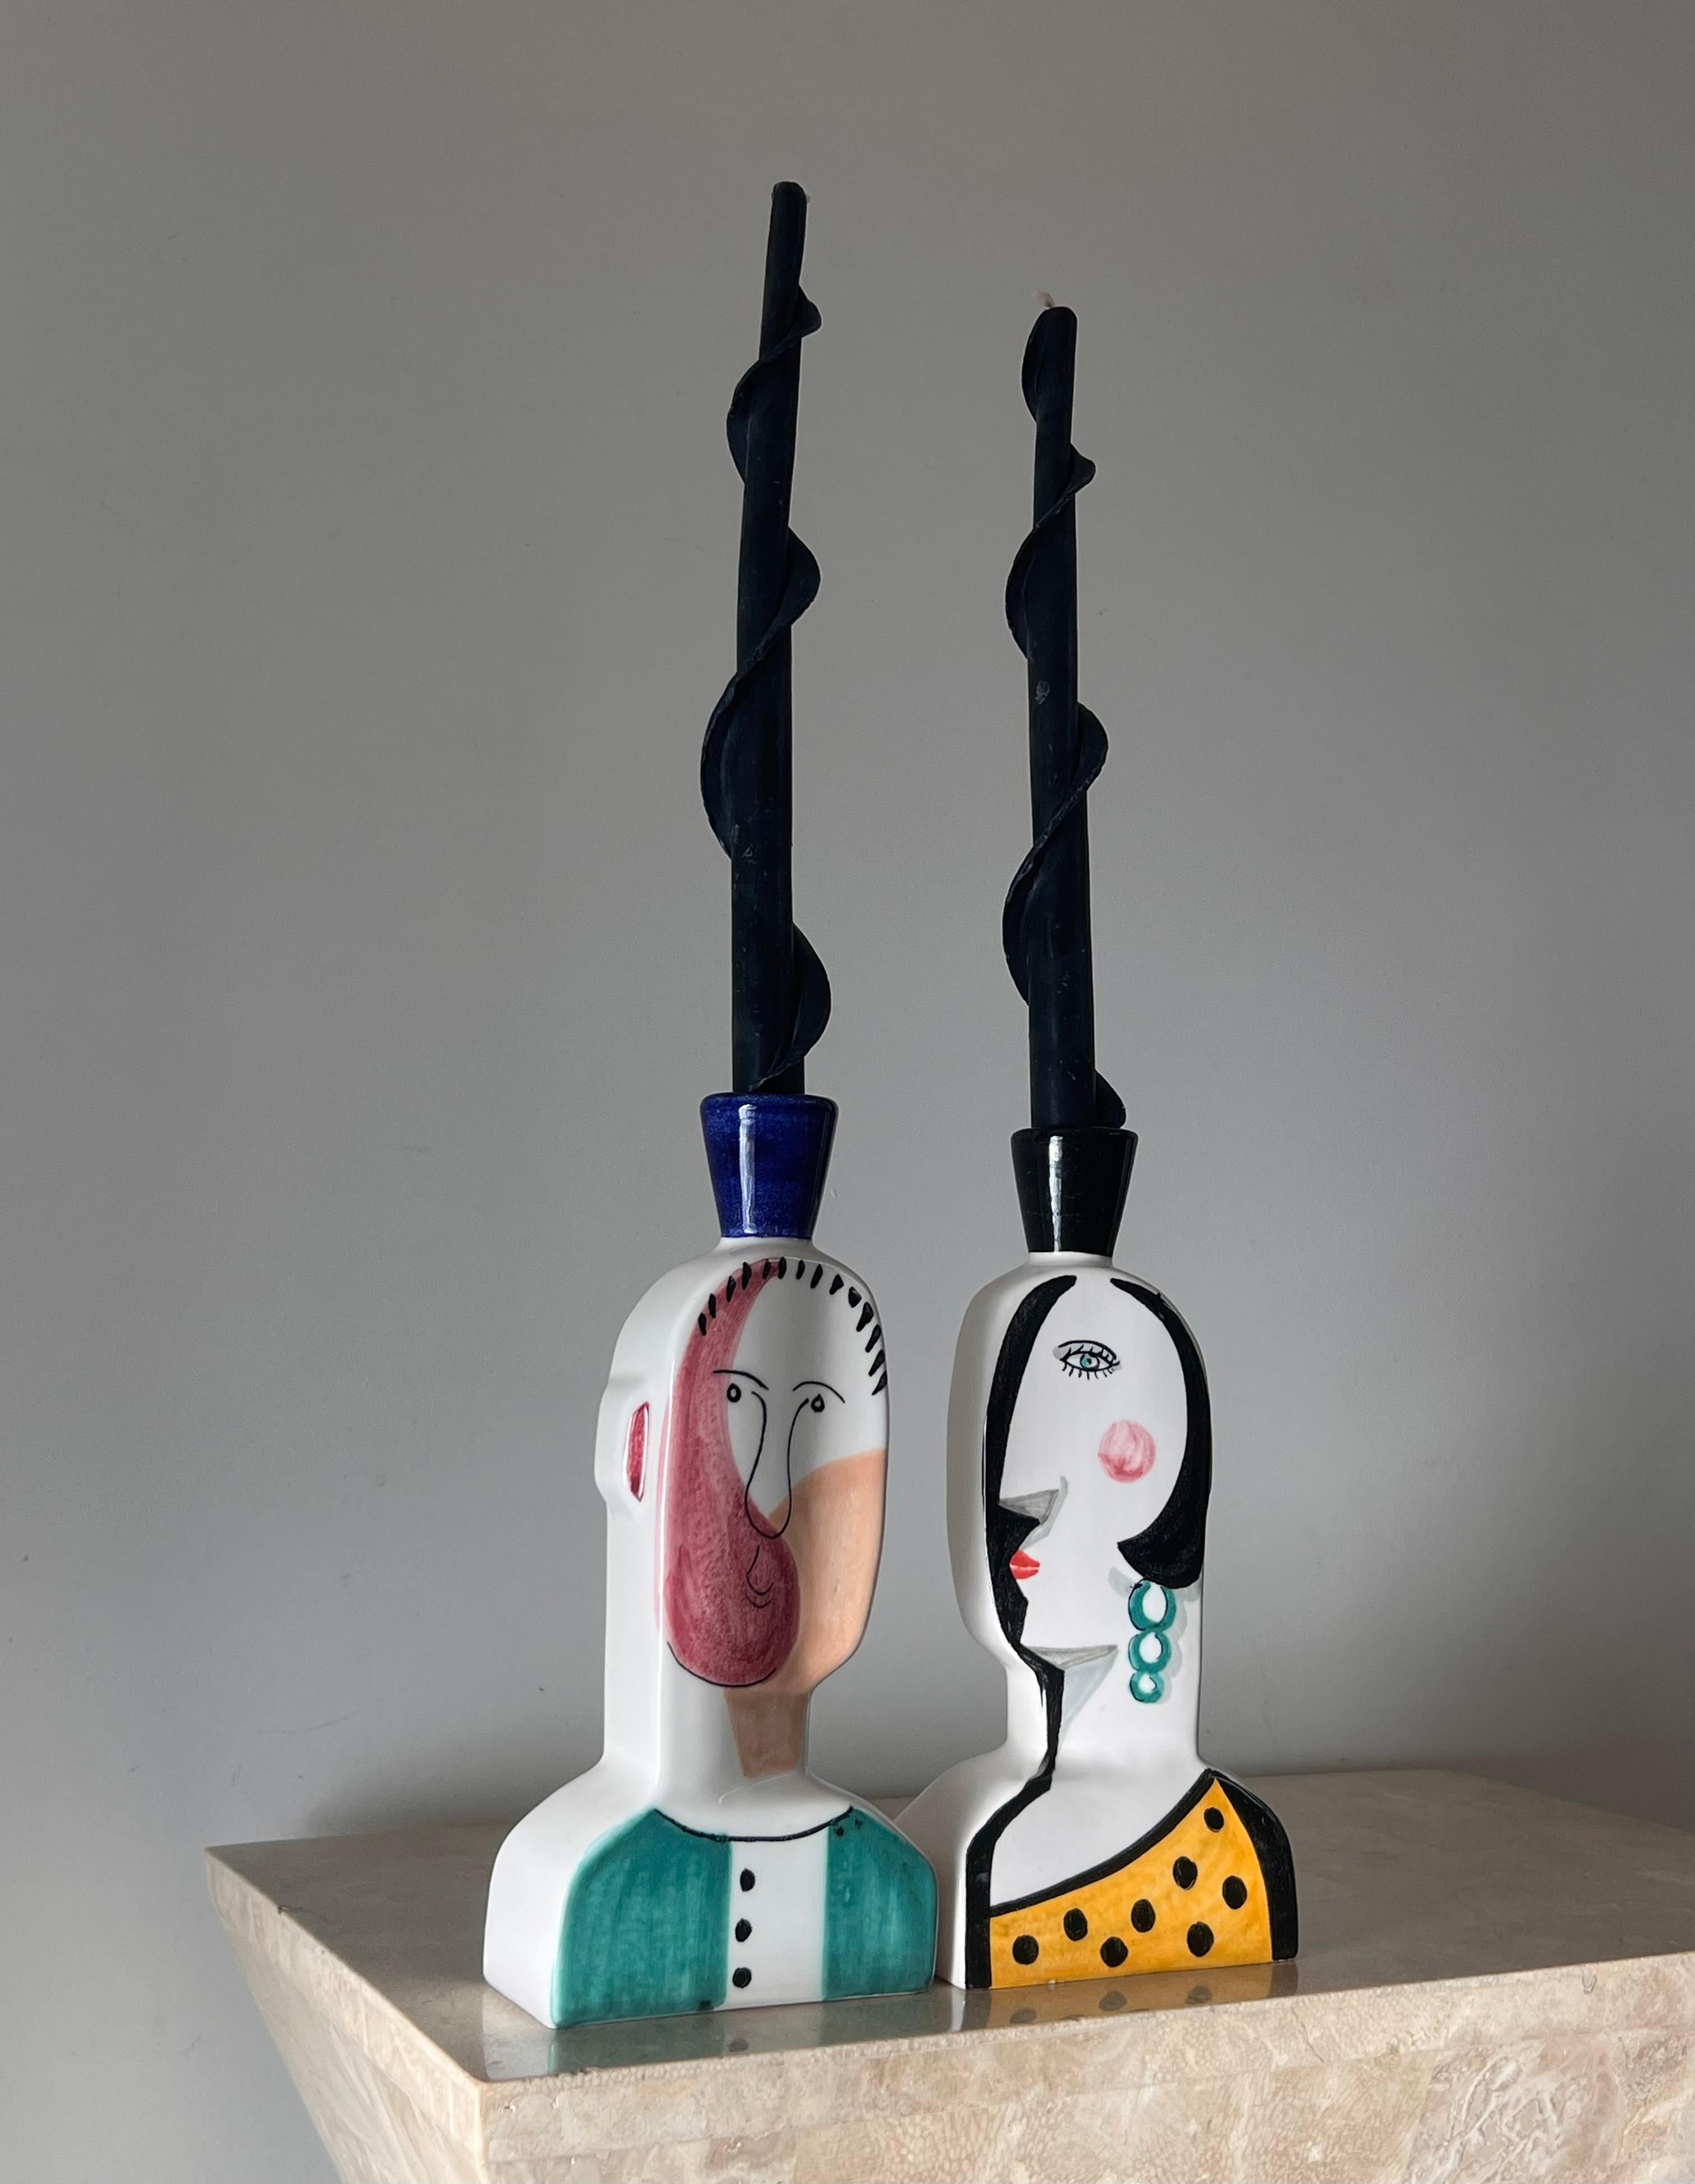 20th Century Spanish Cubist figurative “Face” candlesticks, signed by artist, 20th century